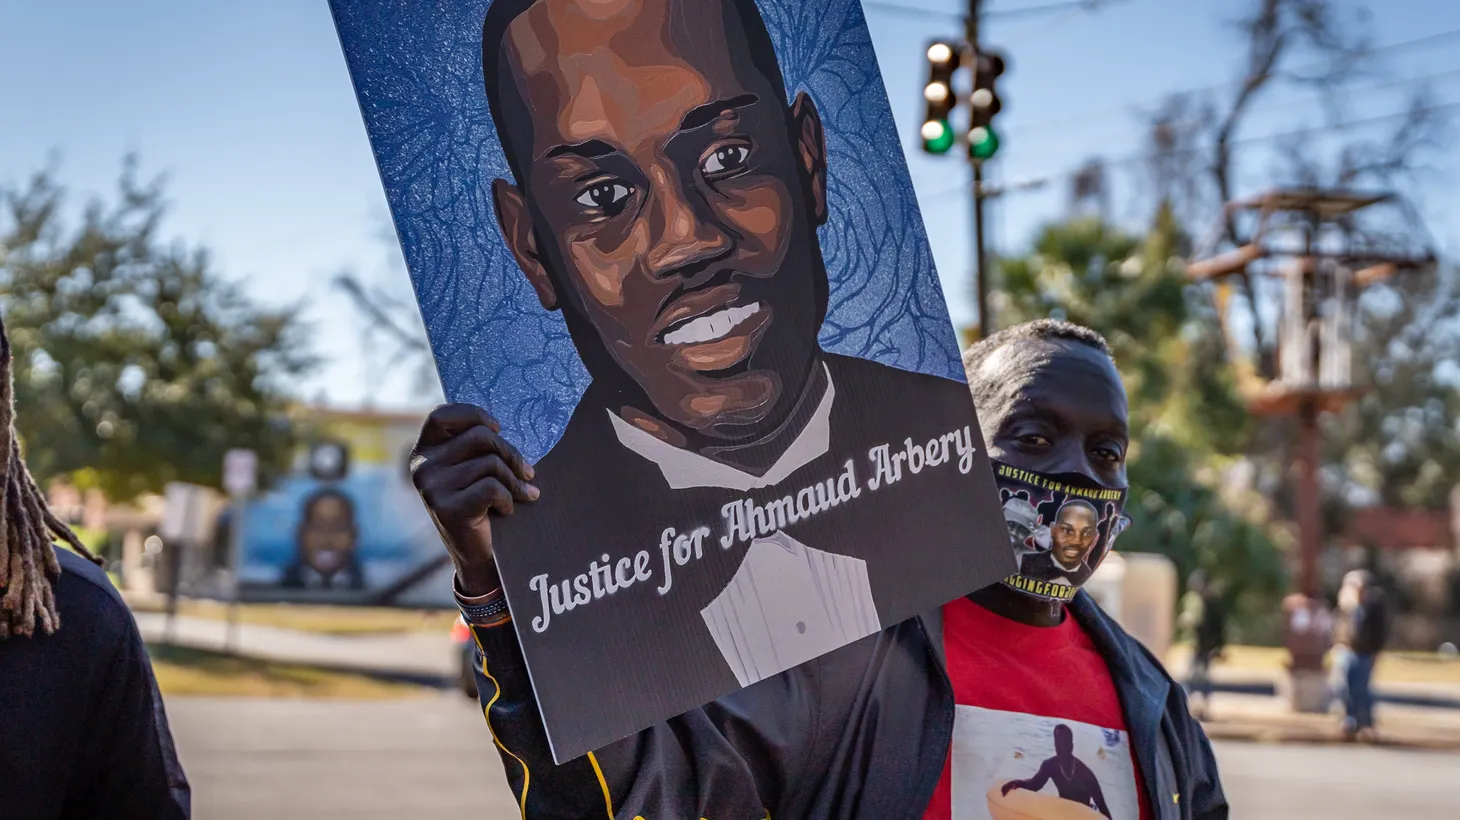 Marcus Arbery, Sr., father of Ahmaud Arbery, carries a portrait of his son in the Rev. Martin Luther King, Jr. Day Parade in Brunswick, Georgia, January 18, 2021.